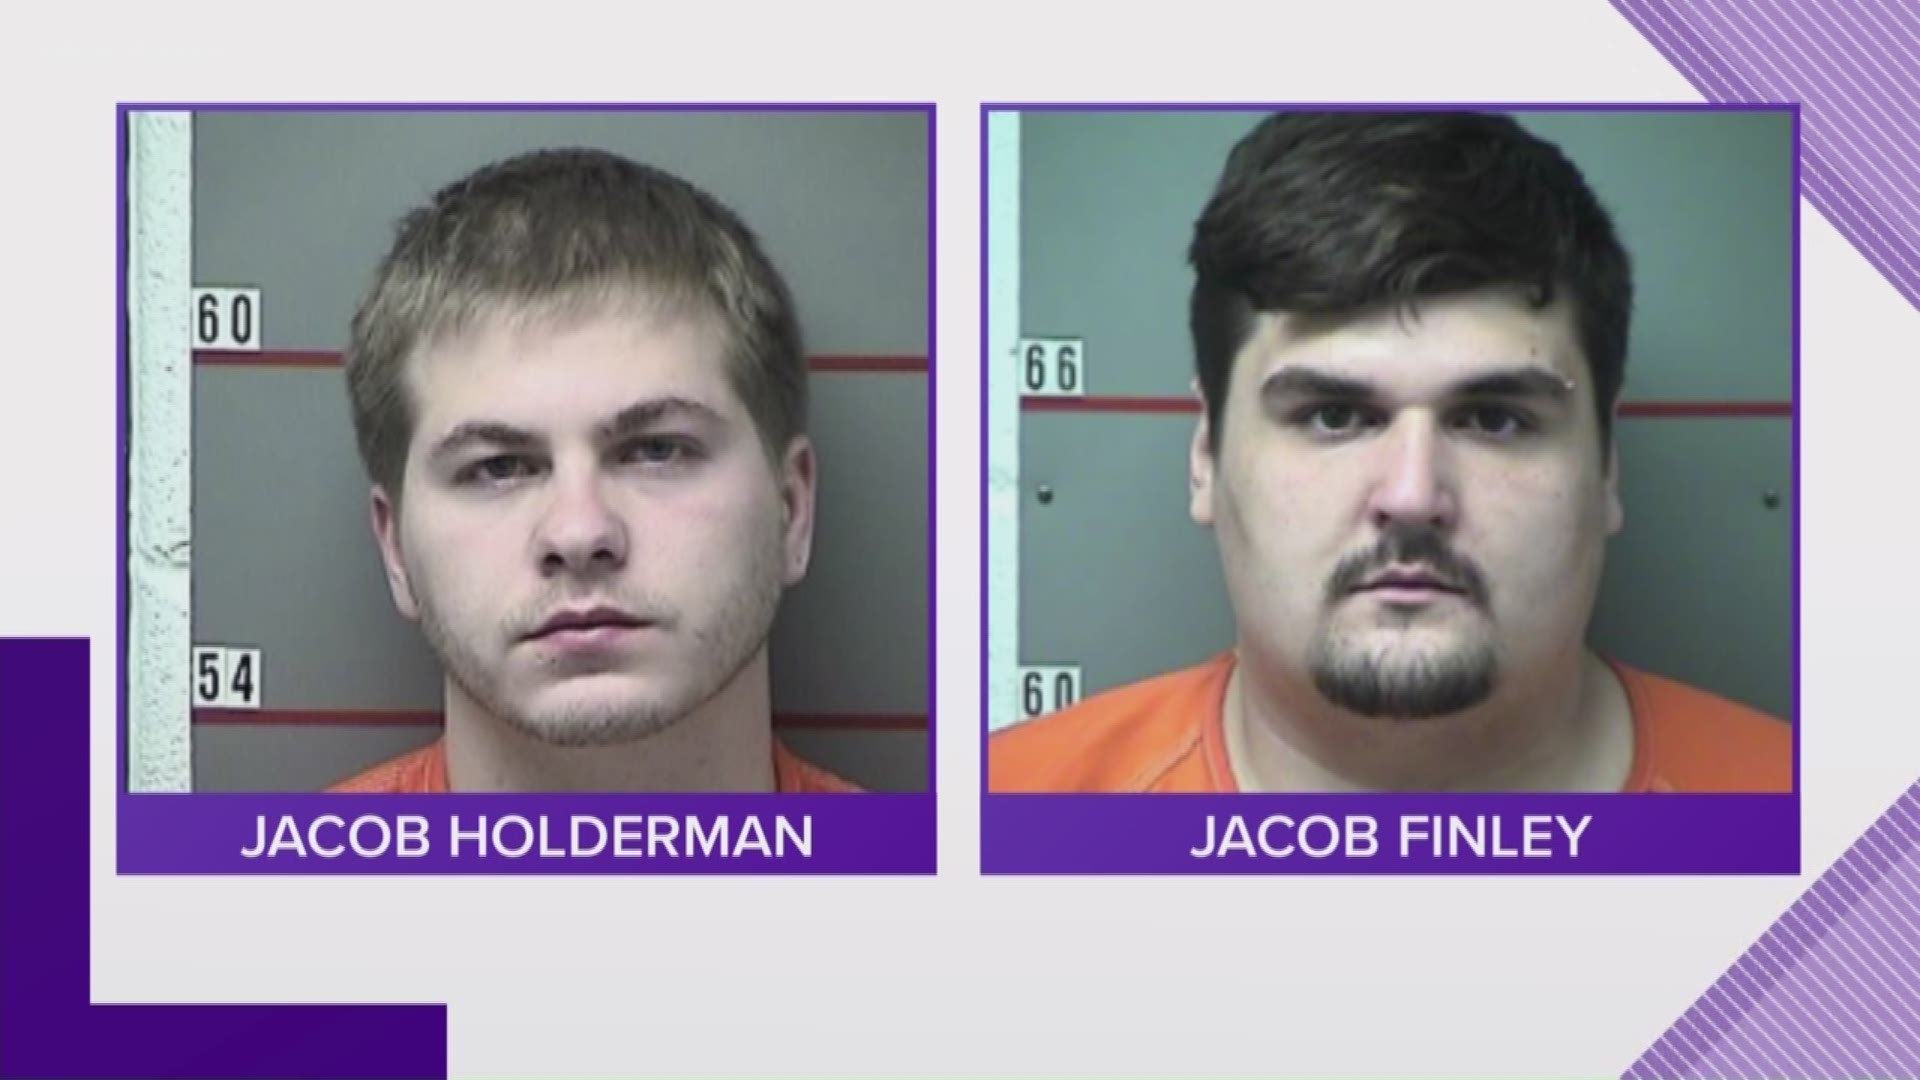 Police say two men are facing charges after trying to break-in an elderly woman's home in Grayson County, Kentucky.